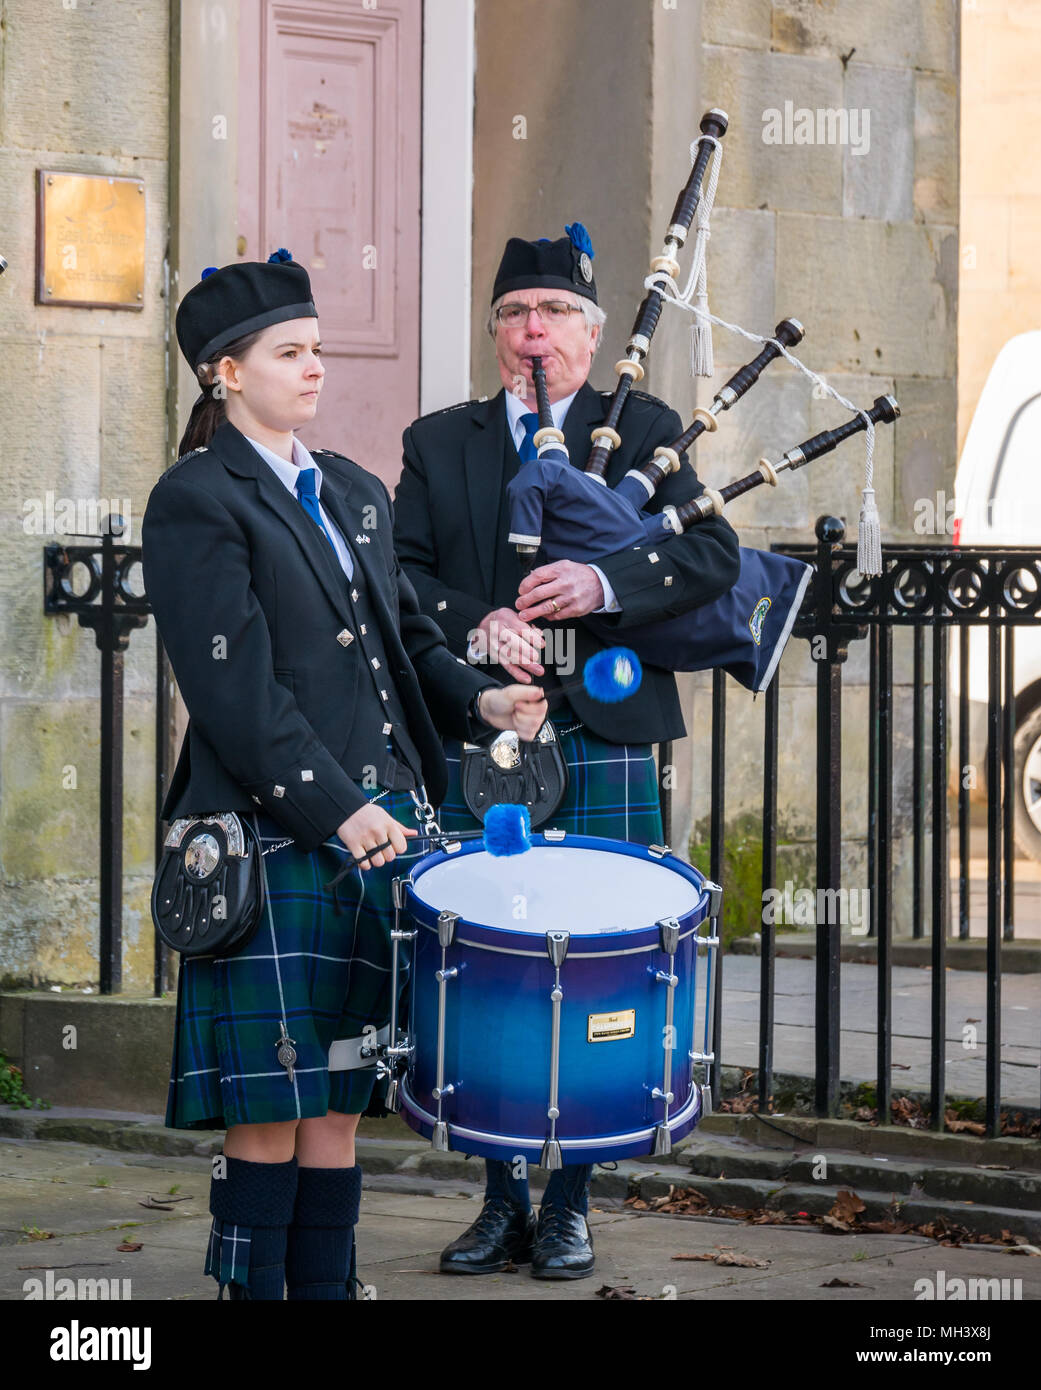 Girl drummer and bagpipe player, Haddington Pipe Band dressed in kilts, Corn Exchange, Place d'Aubigny, Court Street, East Lothian, Scotland, UK Stock Photo